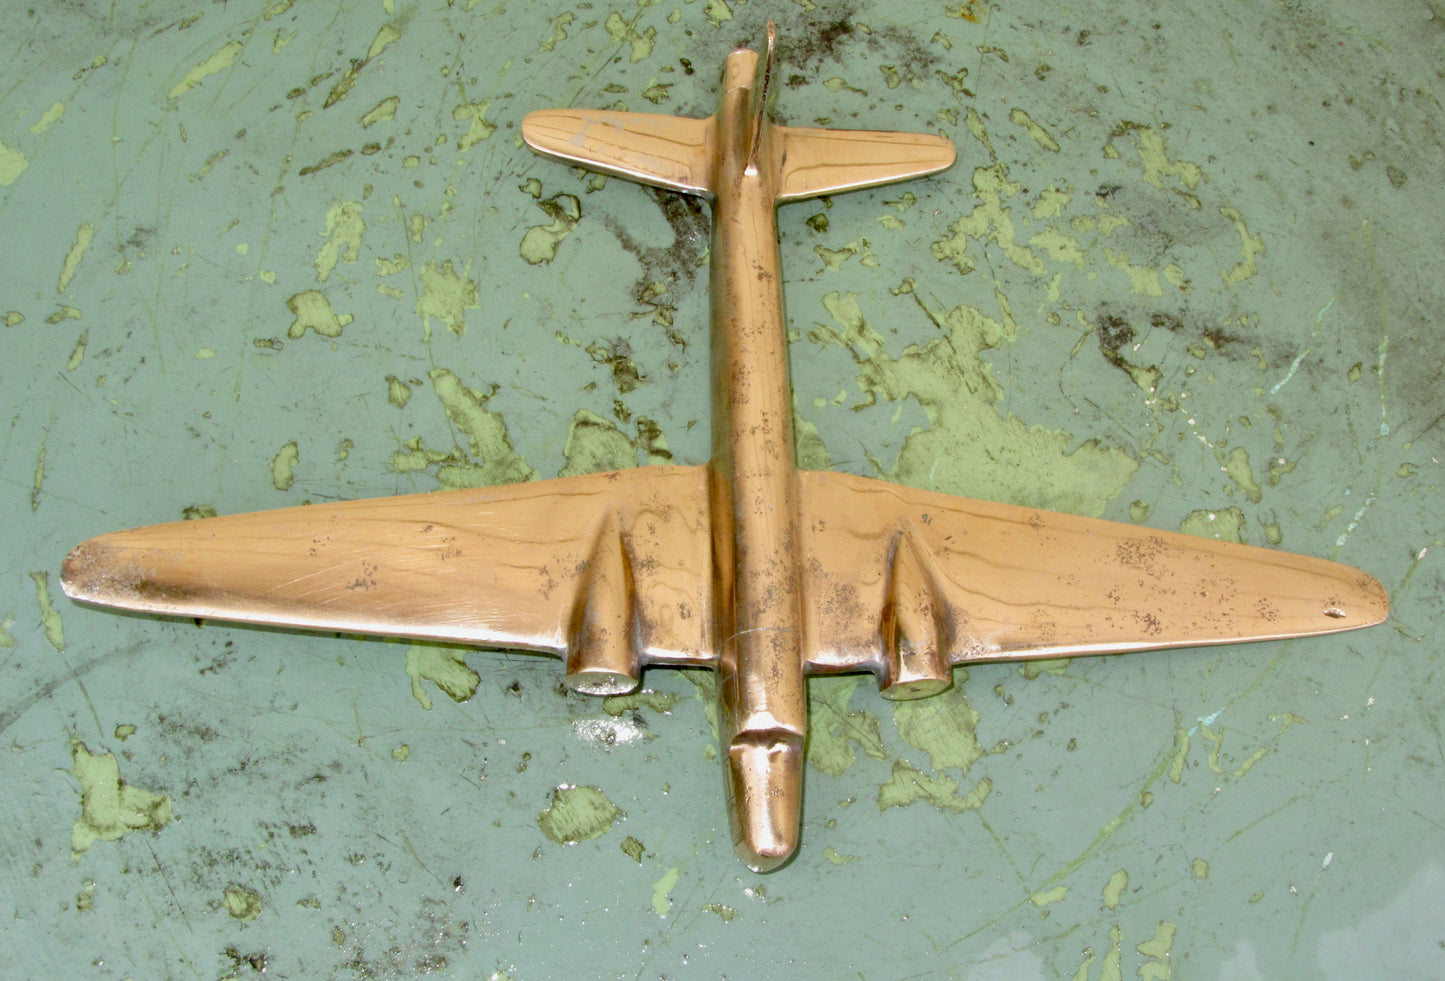 1940s Copper Vickers Wellington WW2 Bomber With A Wingspan Of 36 cm